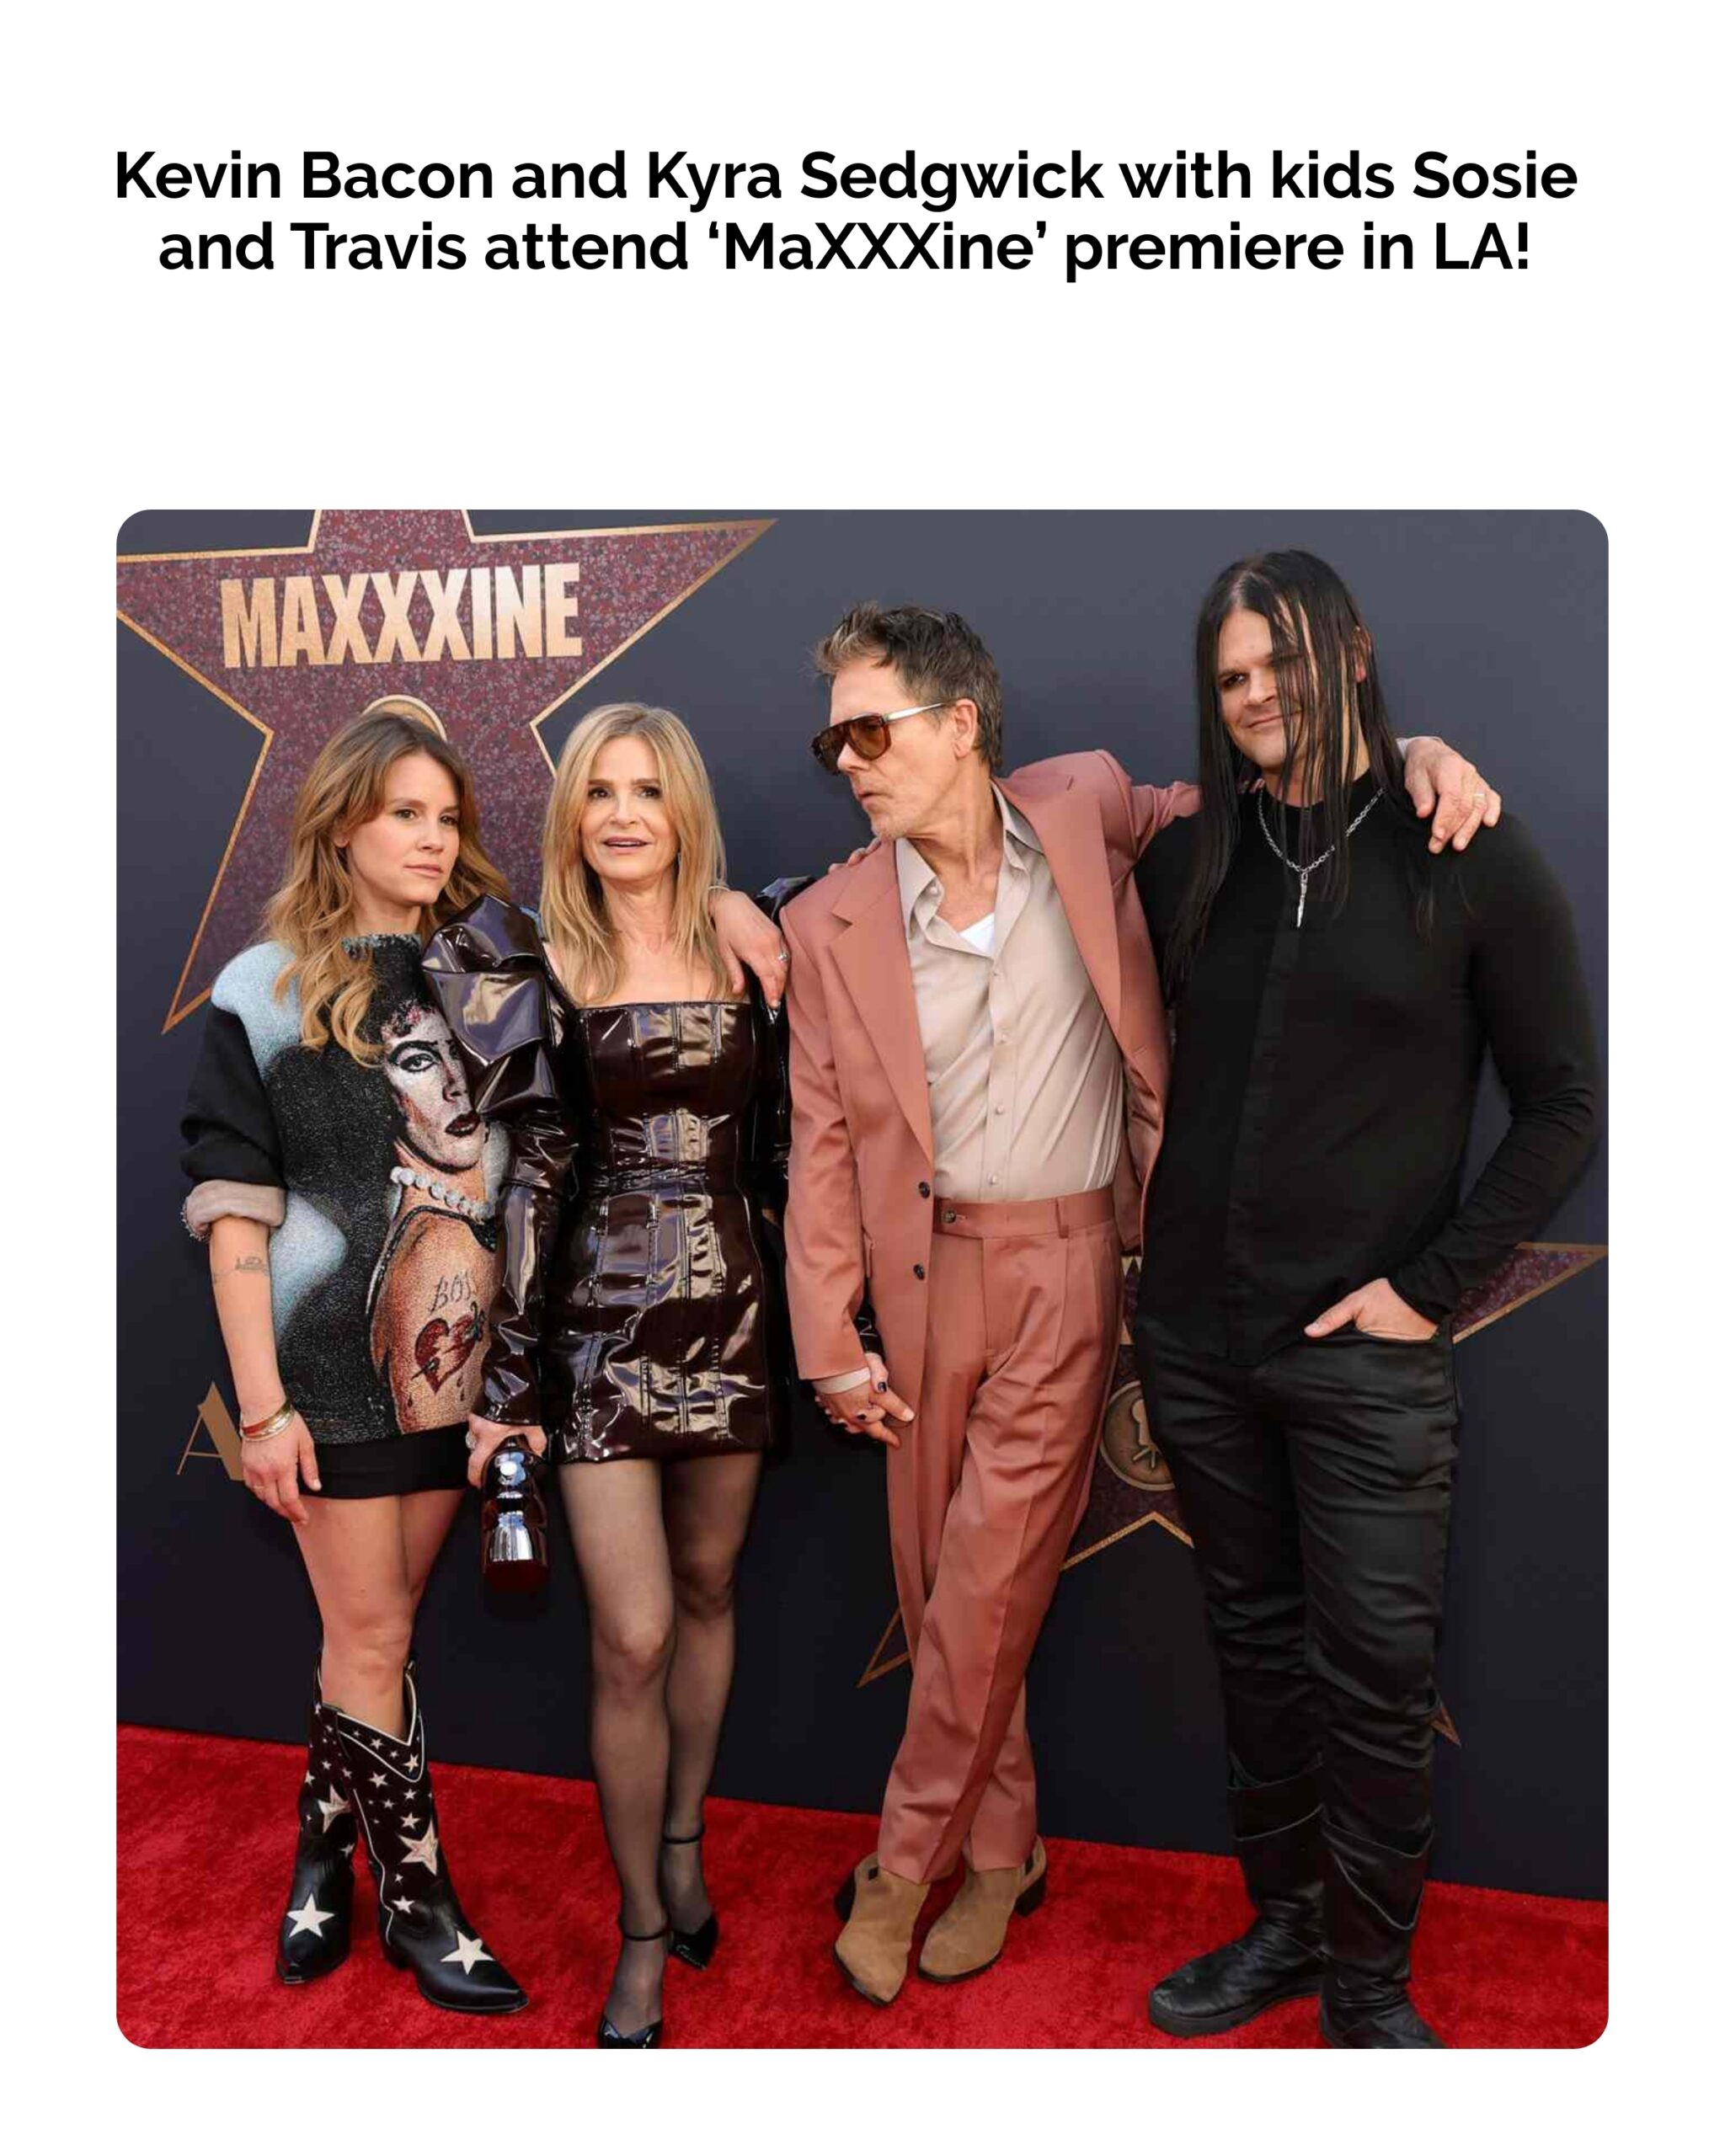 Kevin Bacon and Kyra Sedgwick Joined by Their Kids Sosie and Travis at ‘MaXXXine’ Premiere in Los Angeles